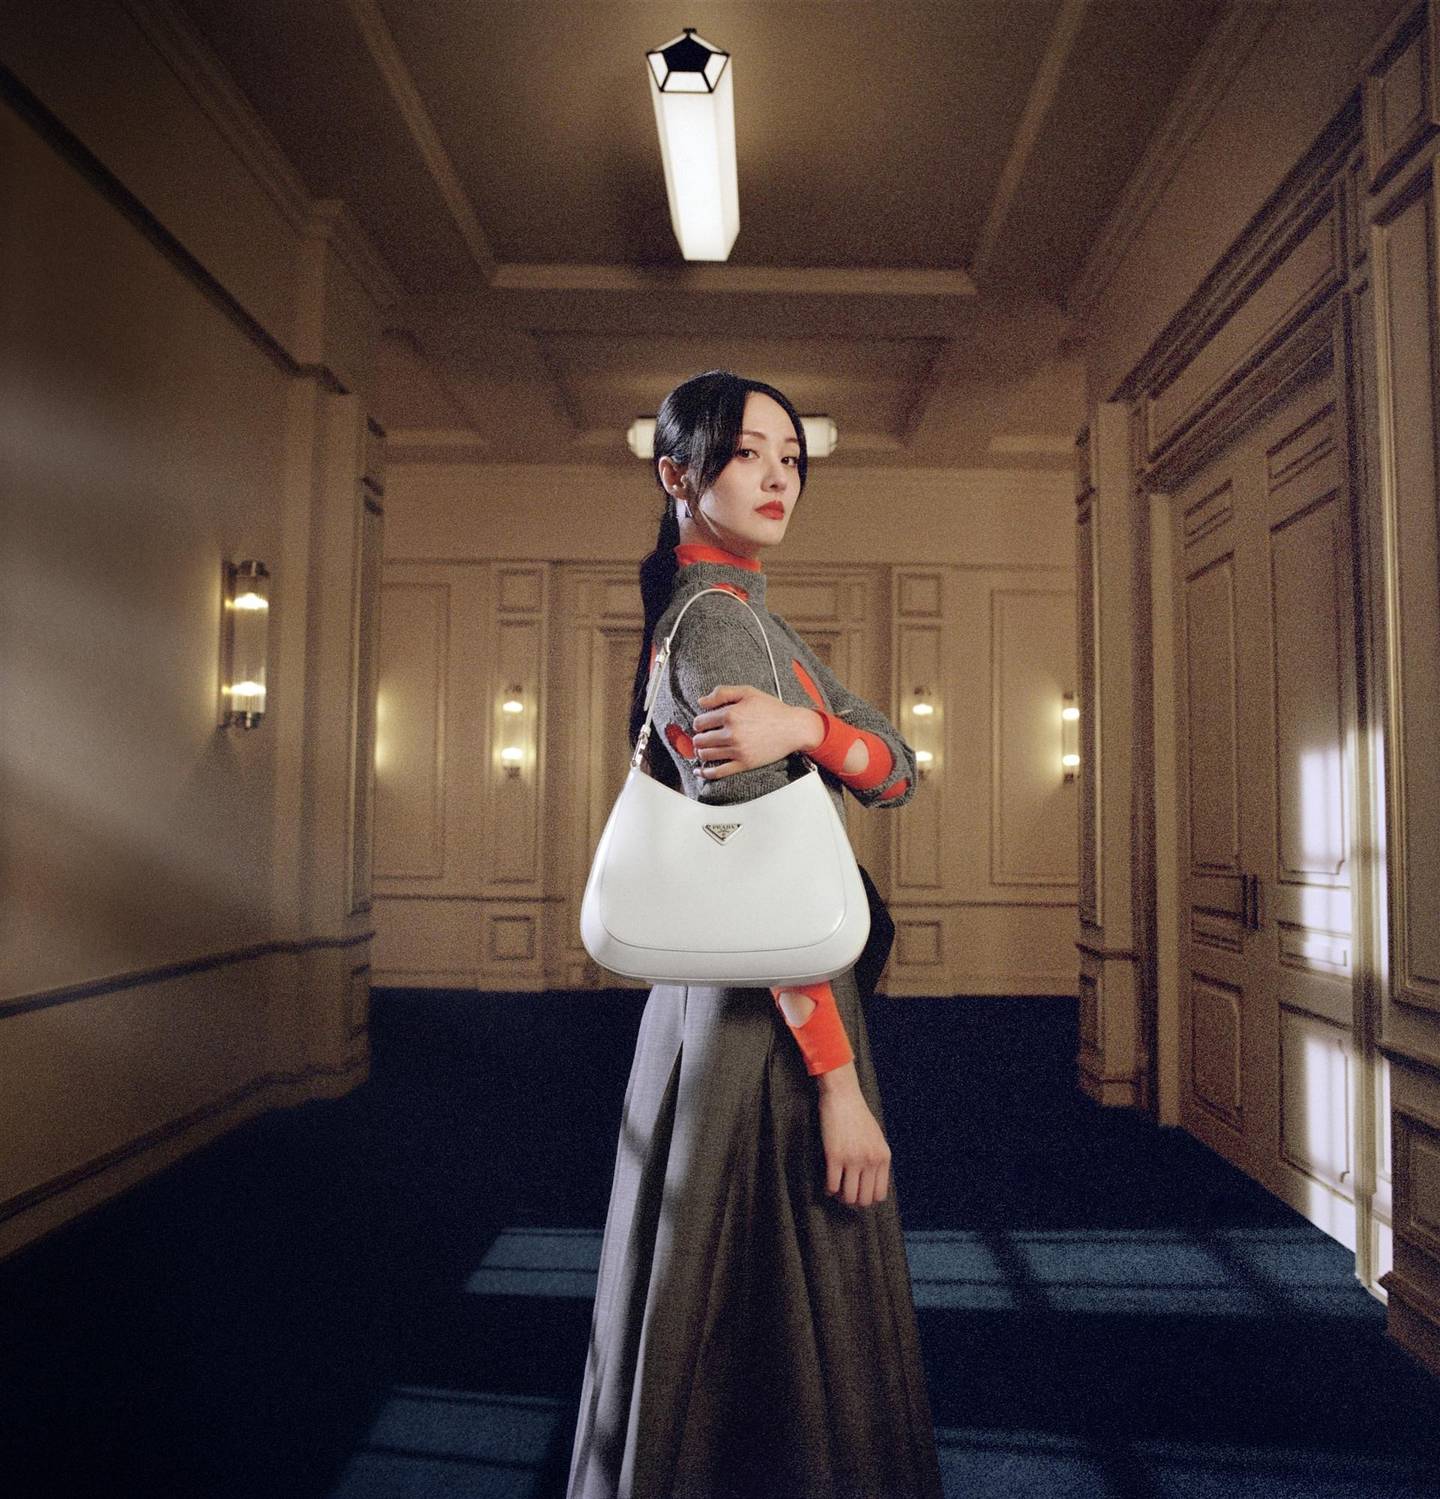 Actress Zheng Shuang in Prada's latest Chinese New Year campaign.